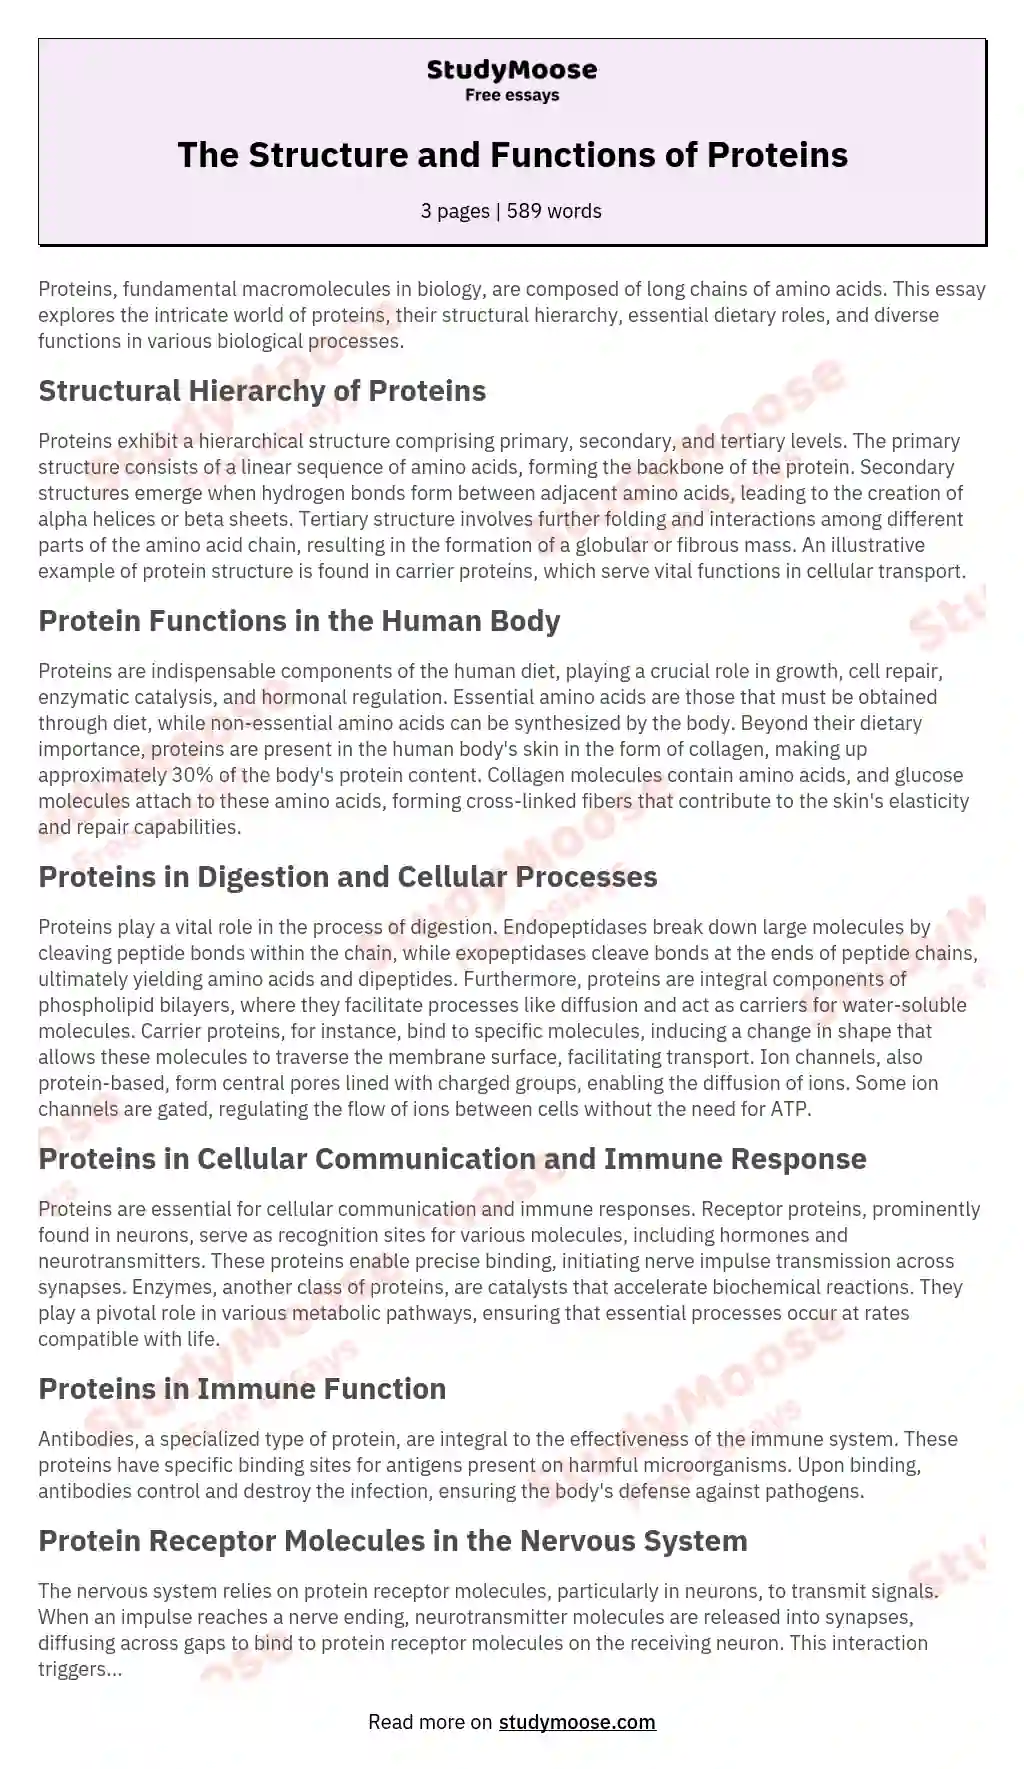 The Structure and Functions of Proteins essay